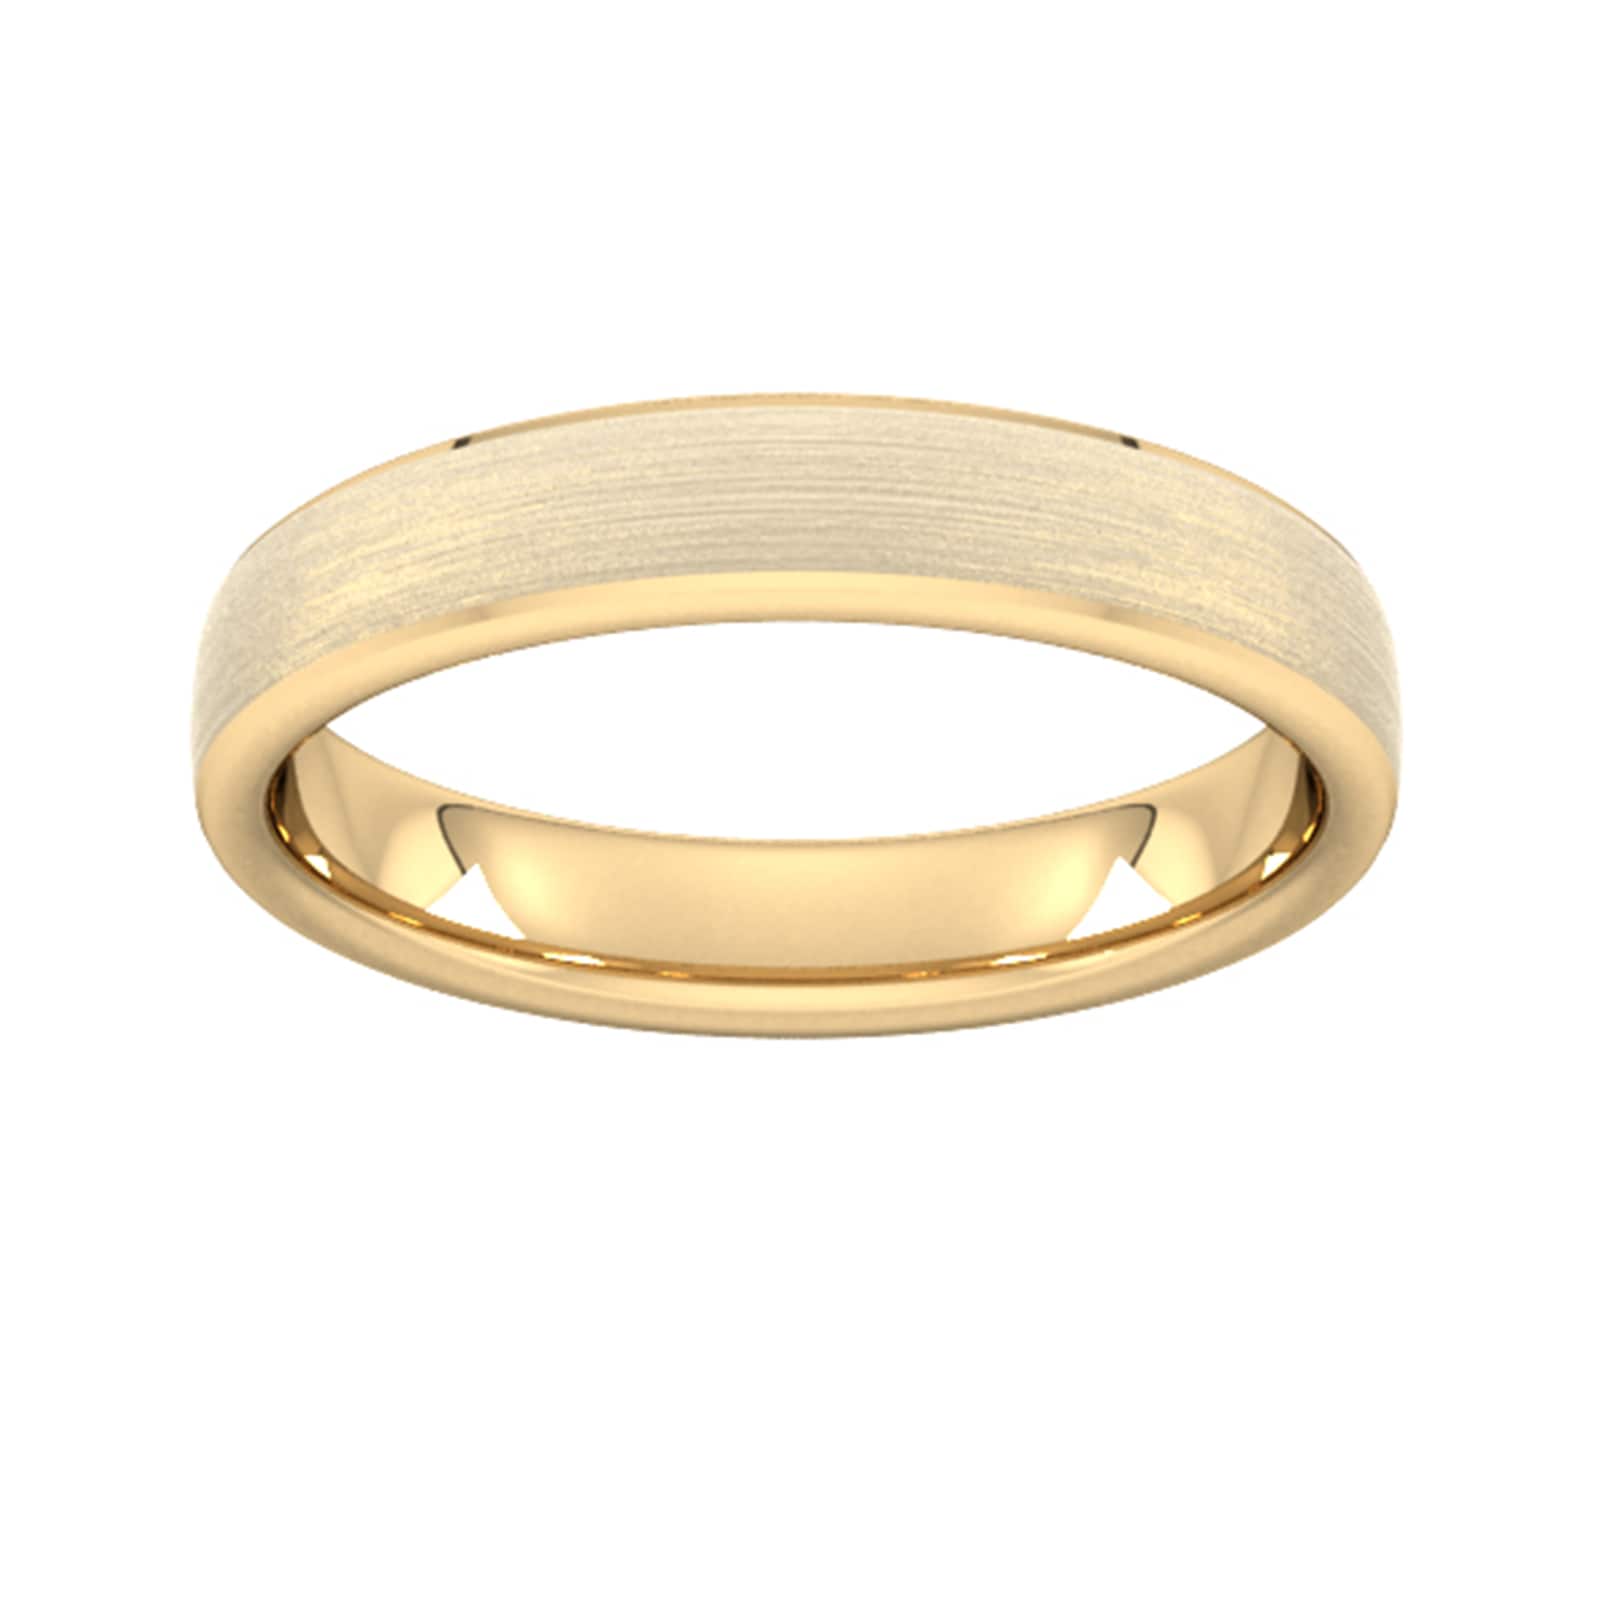 4mm Slight Court Heavy Polished Chamfered Edges With Matt Centre Wedding Ring In 18 Carat Yellow Gold - Ring Size P